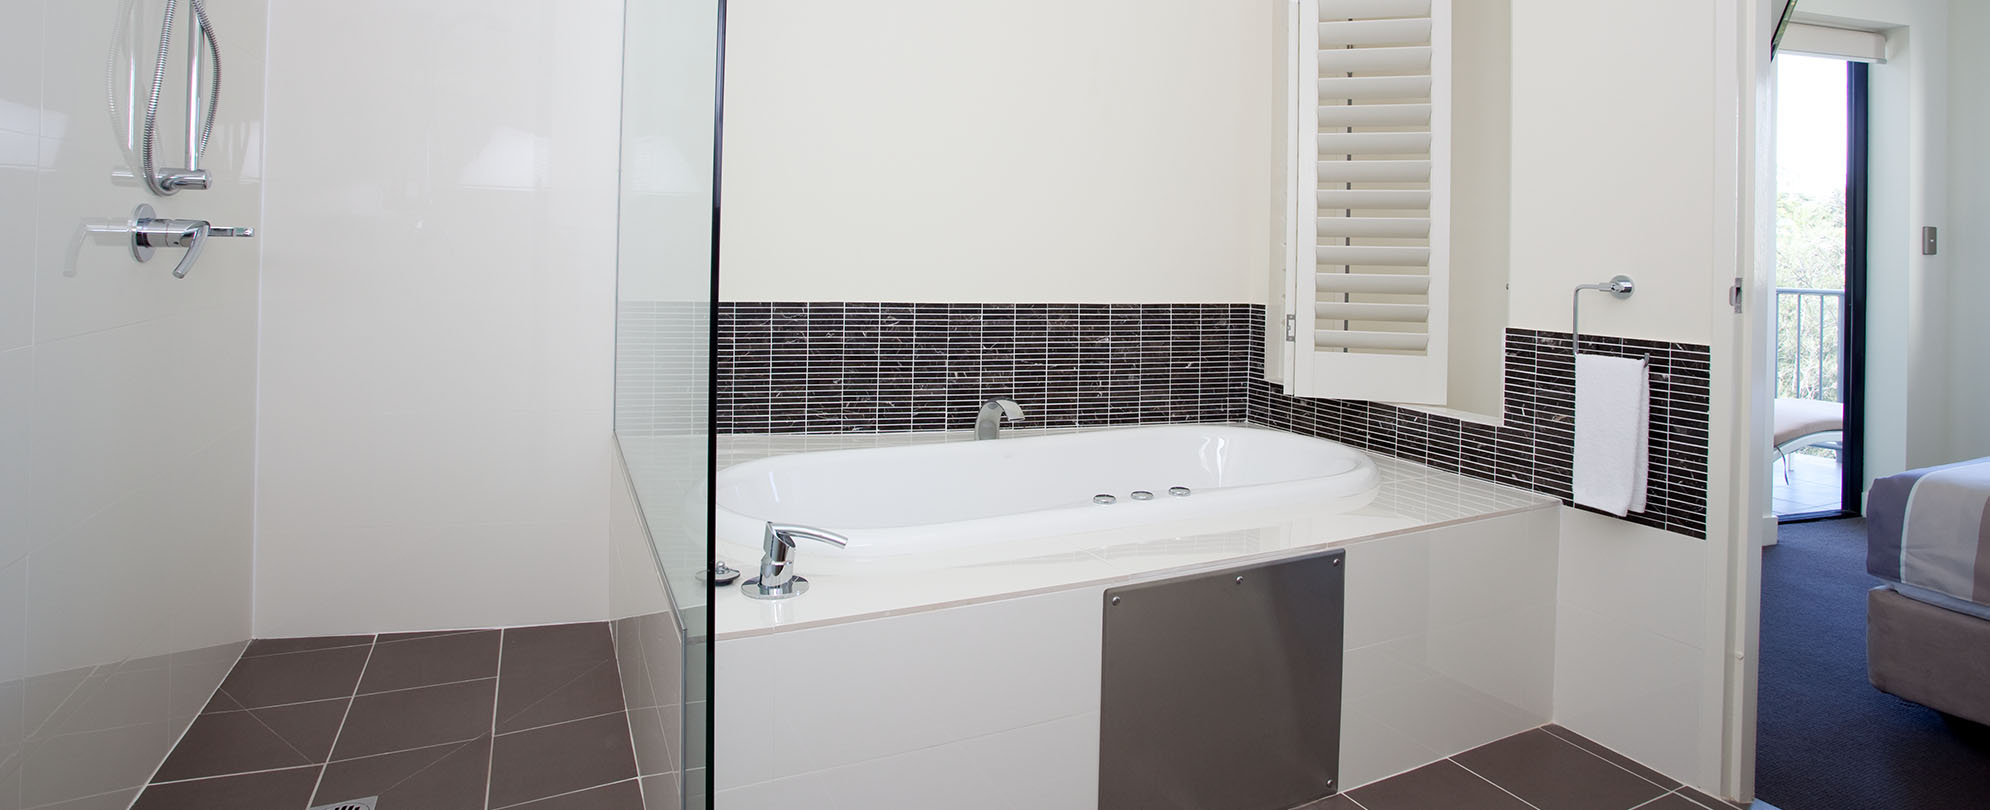 The walk-in shower and tub in the bathroom of a 2-bedroom grand suite at Club Wyndham Coffs Harbor.